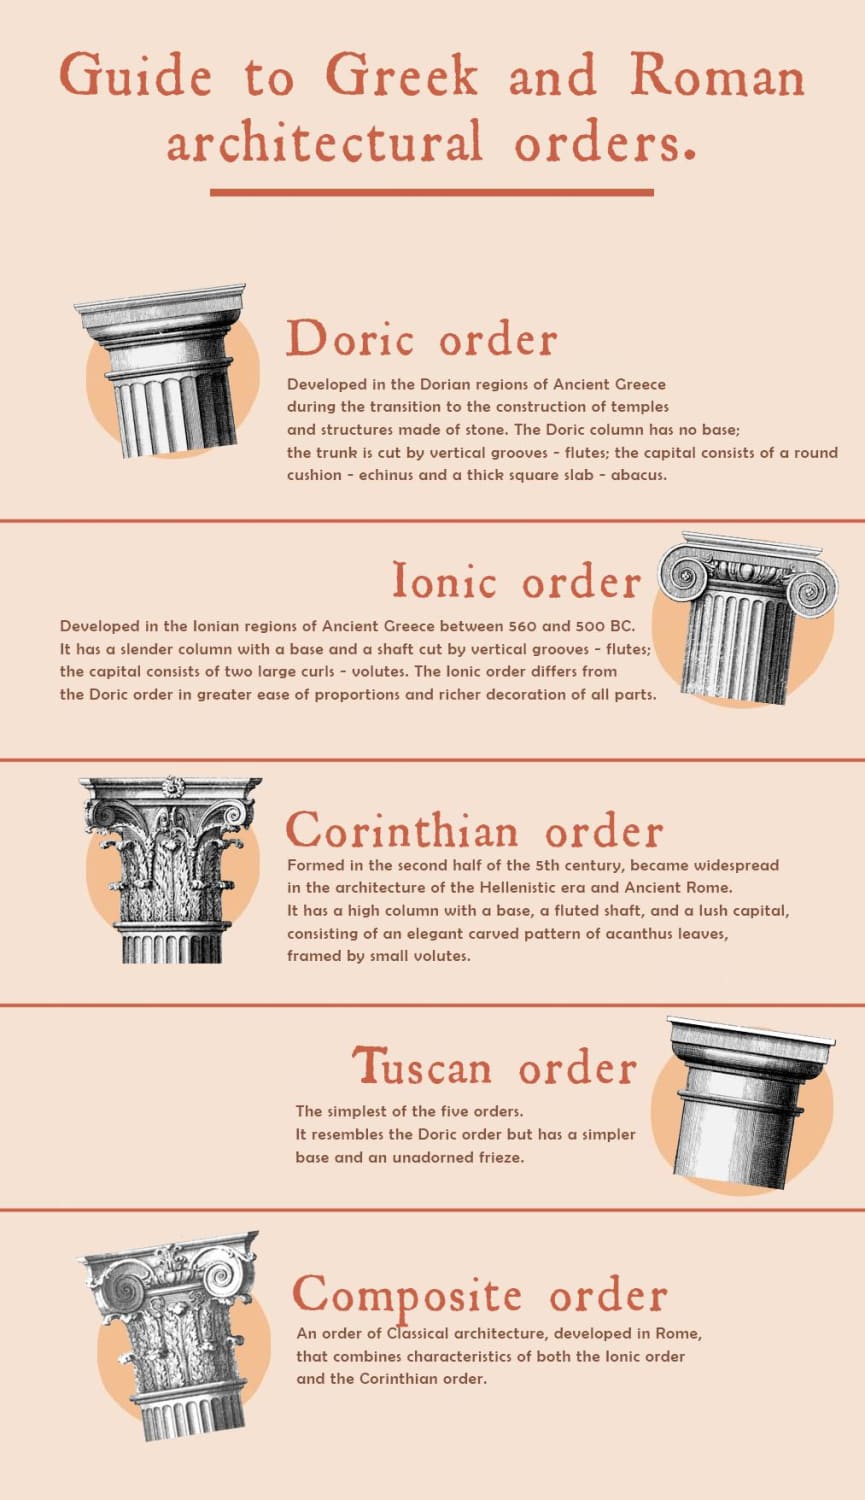 Guide to ancient Greek and Roman architectural orders.